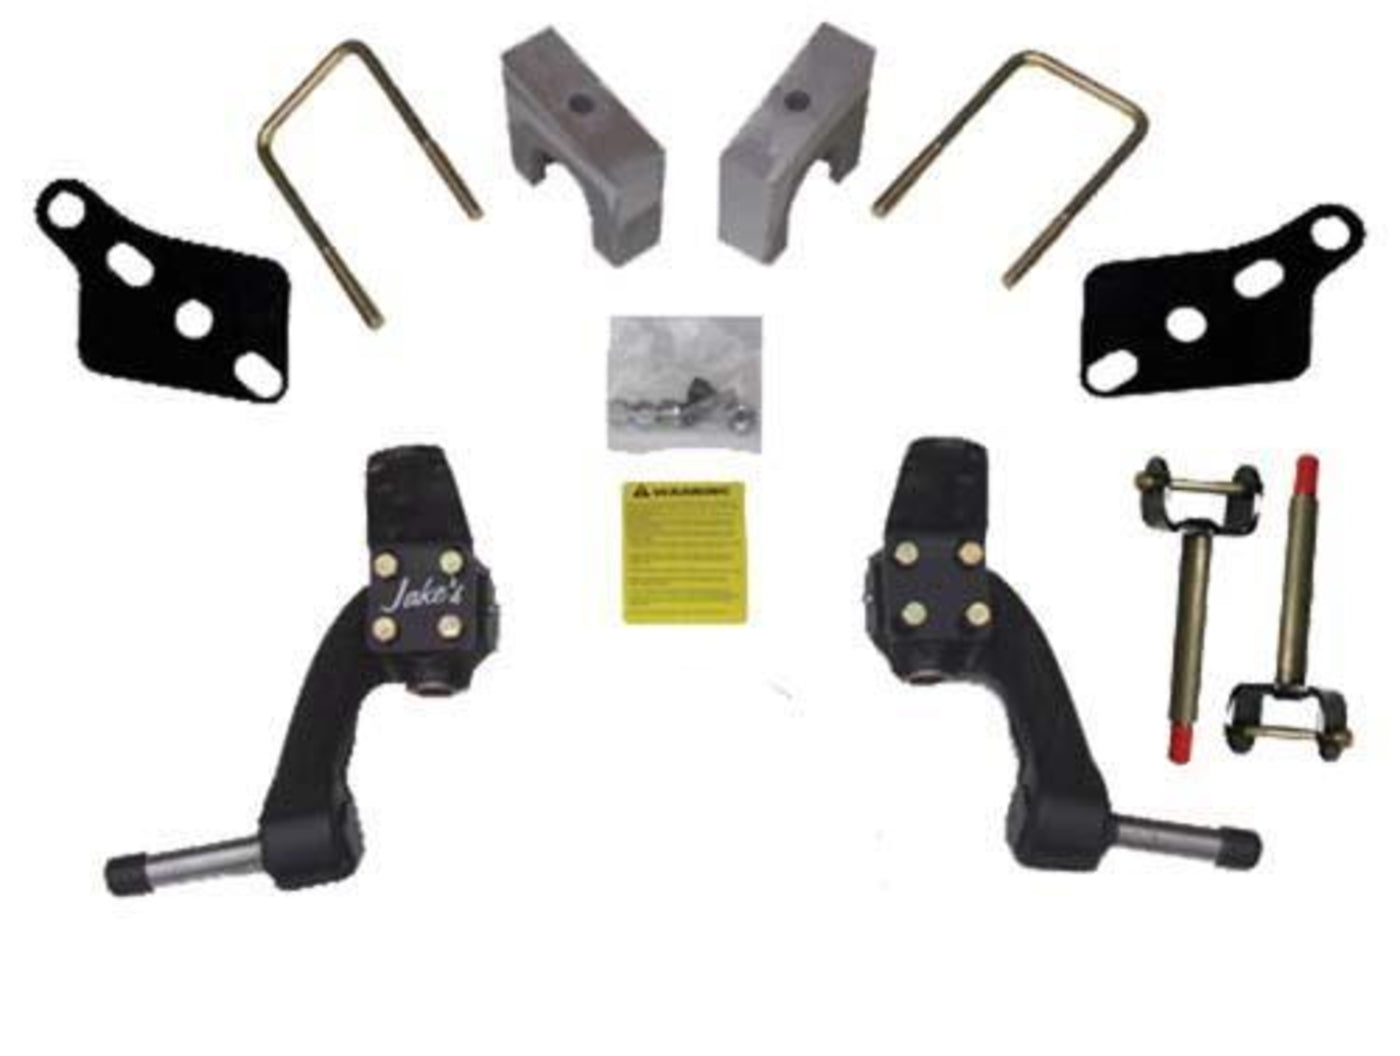 Jake's Club Car Precedent 6" Spindle Lift Kit (Years 2004-Up)